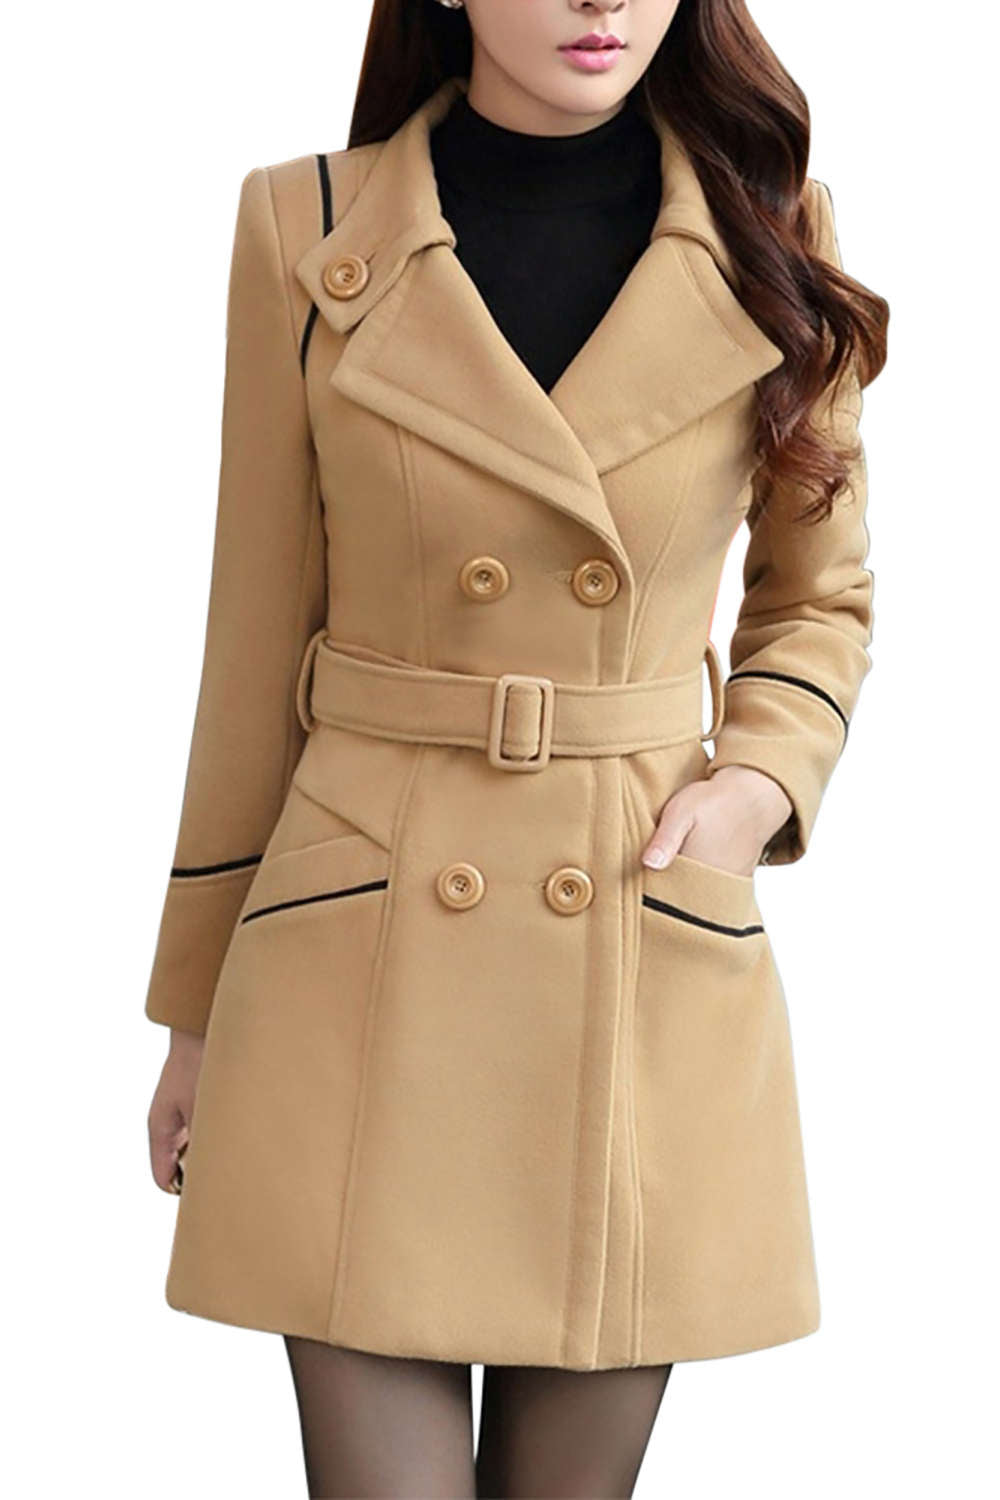 Iyasson Women's Double Breasted Blend Coat